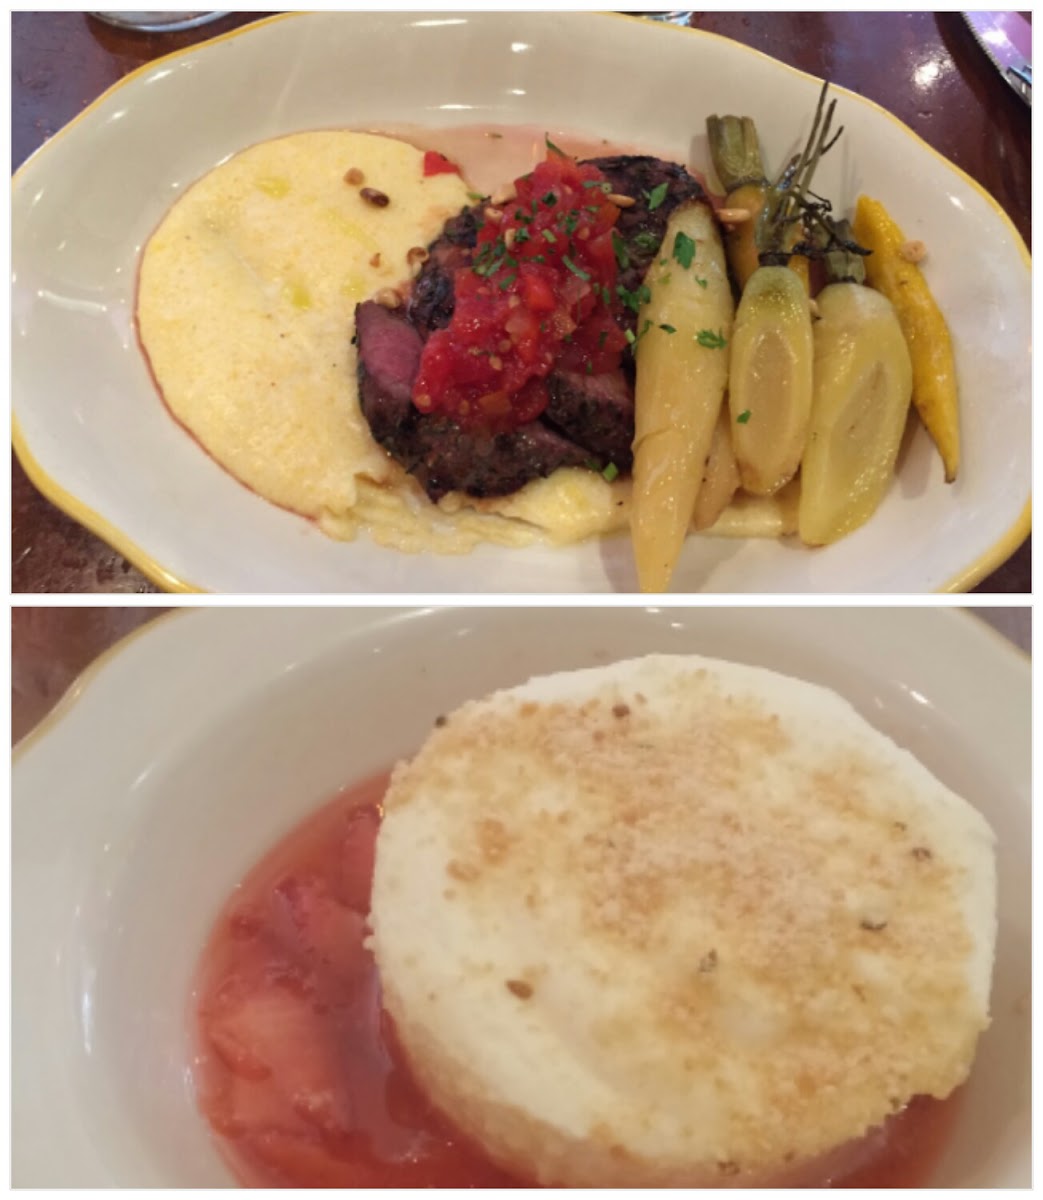 Lamb special with creamy polenta and carrots, Italian custard with berry compote.